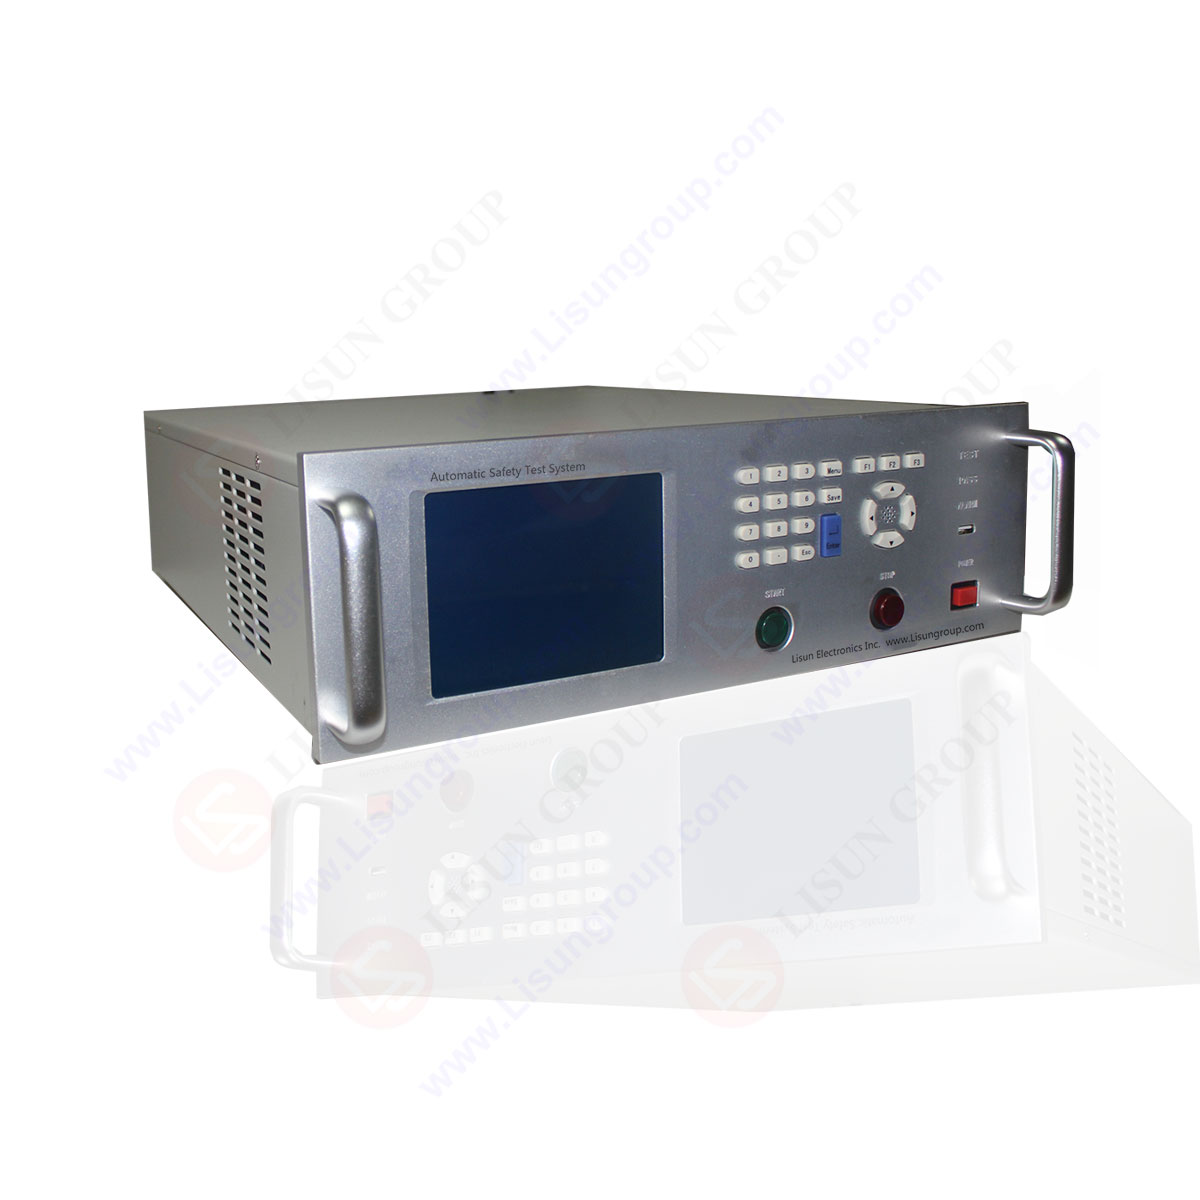 Introduction of electrical safety tester - LISUN